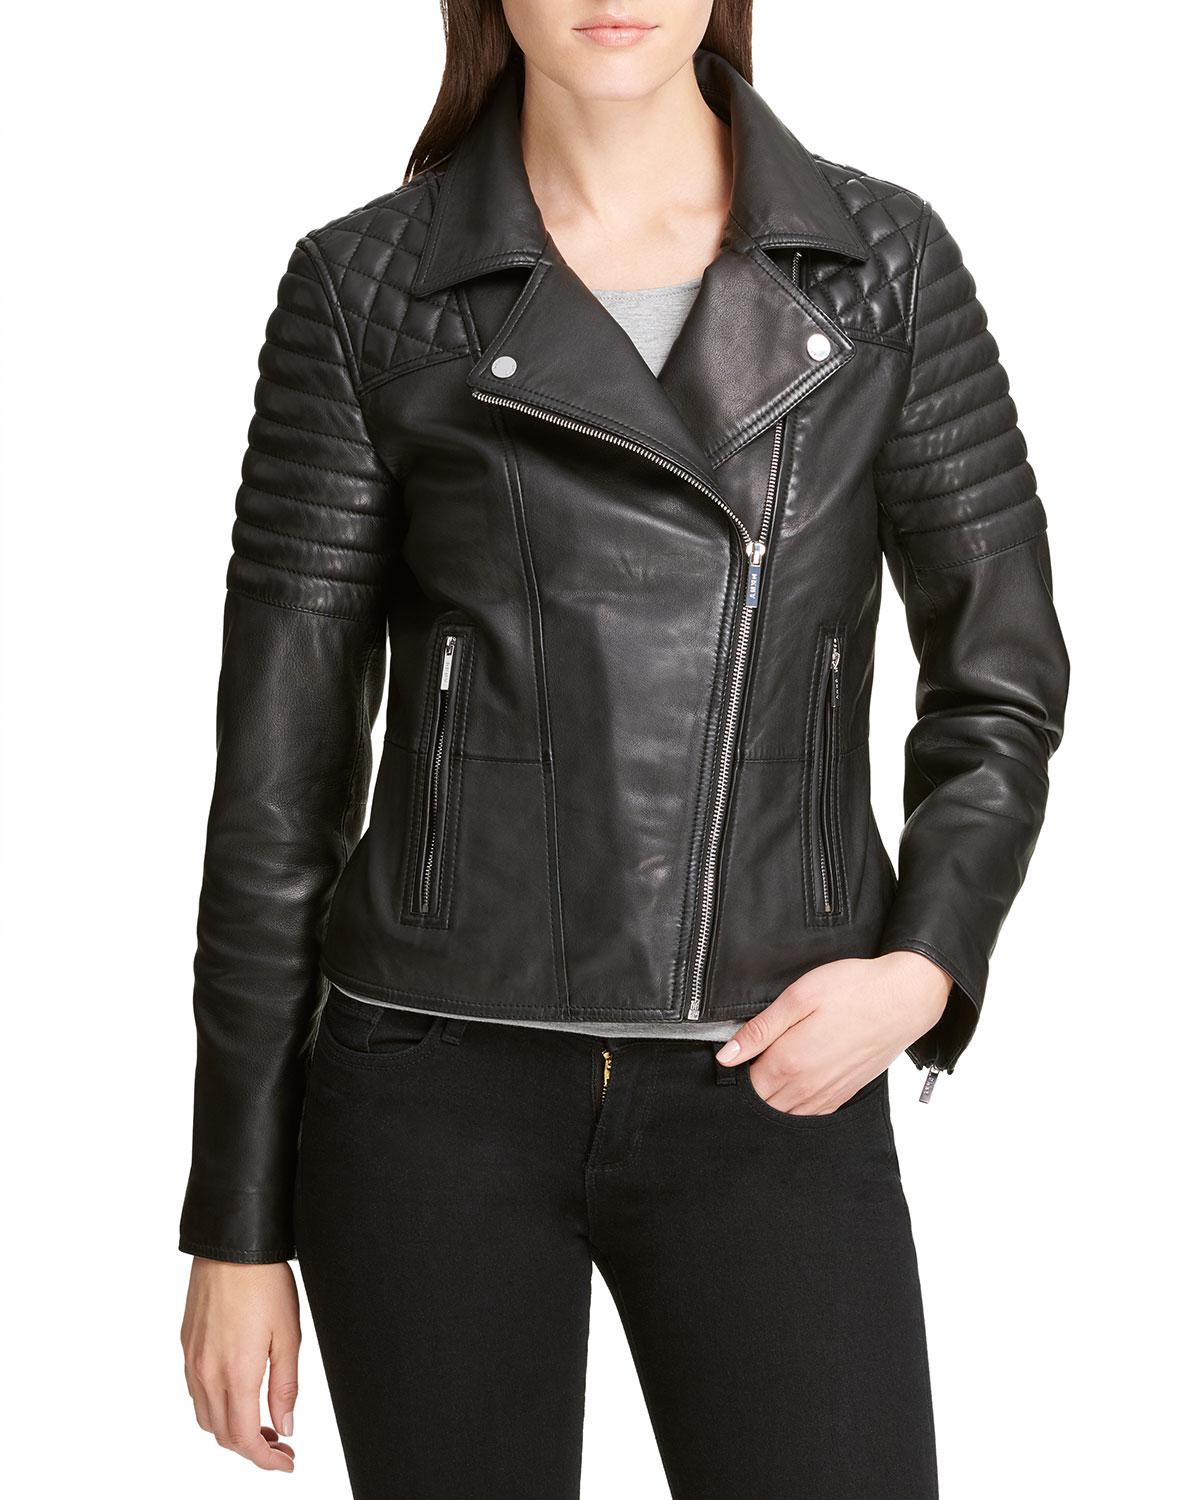 DKNY Leather Solid Quilted Asymmetrical Moto Jacket in Black - Lyst